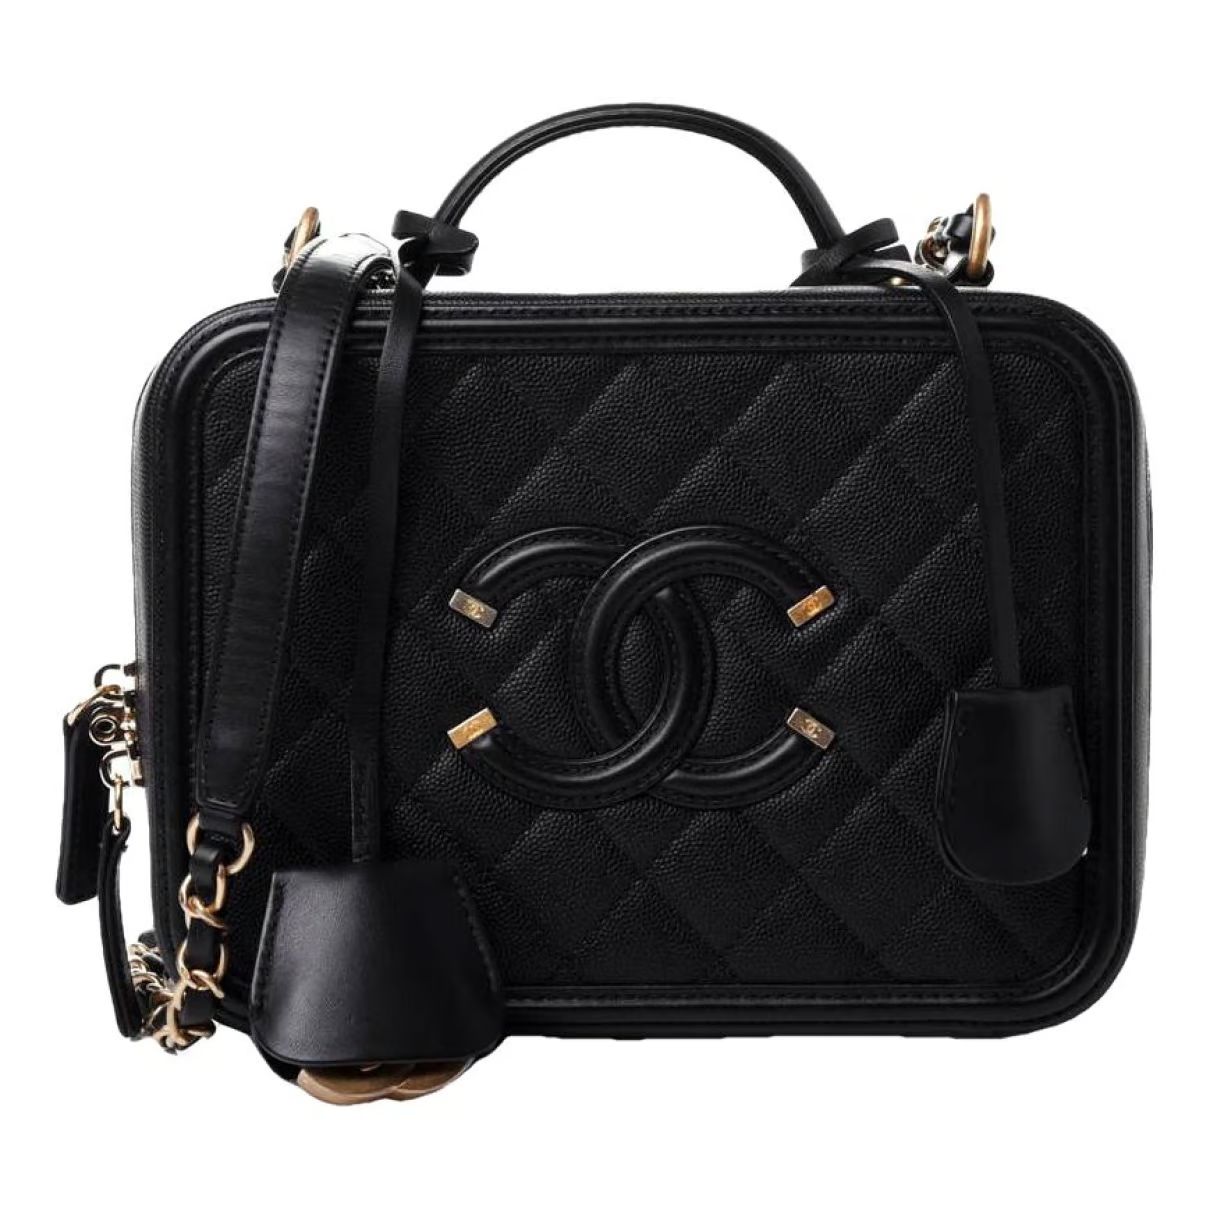 Chanel Vanity leather tote | Vestiaire Collective (Global)